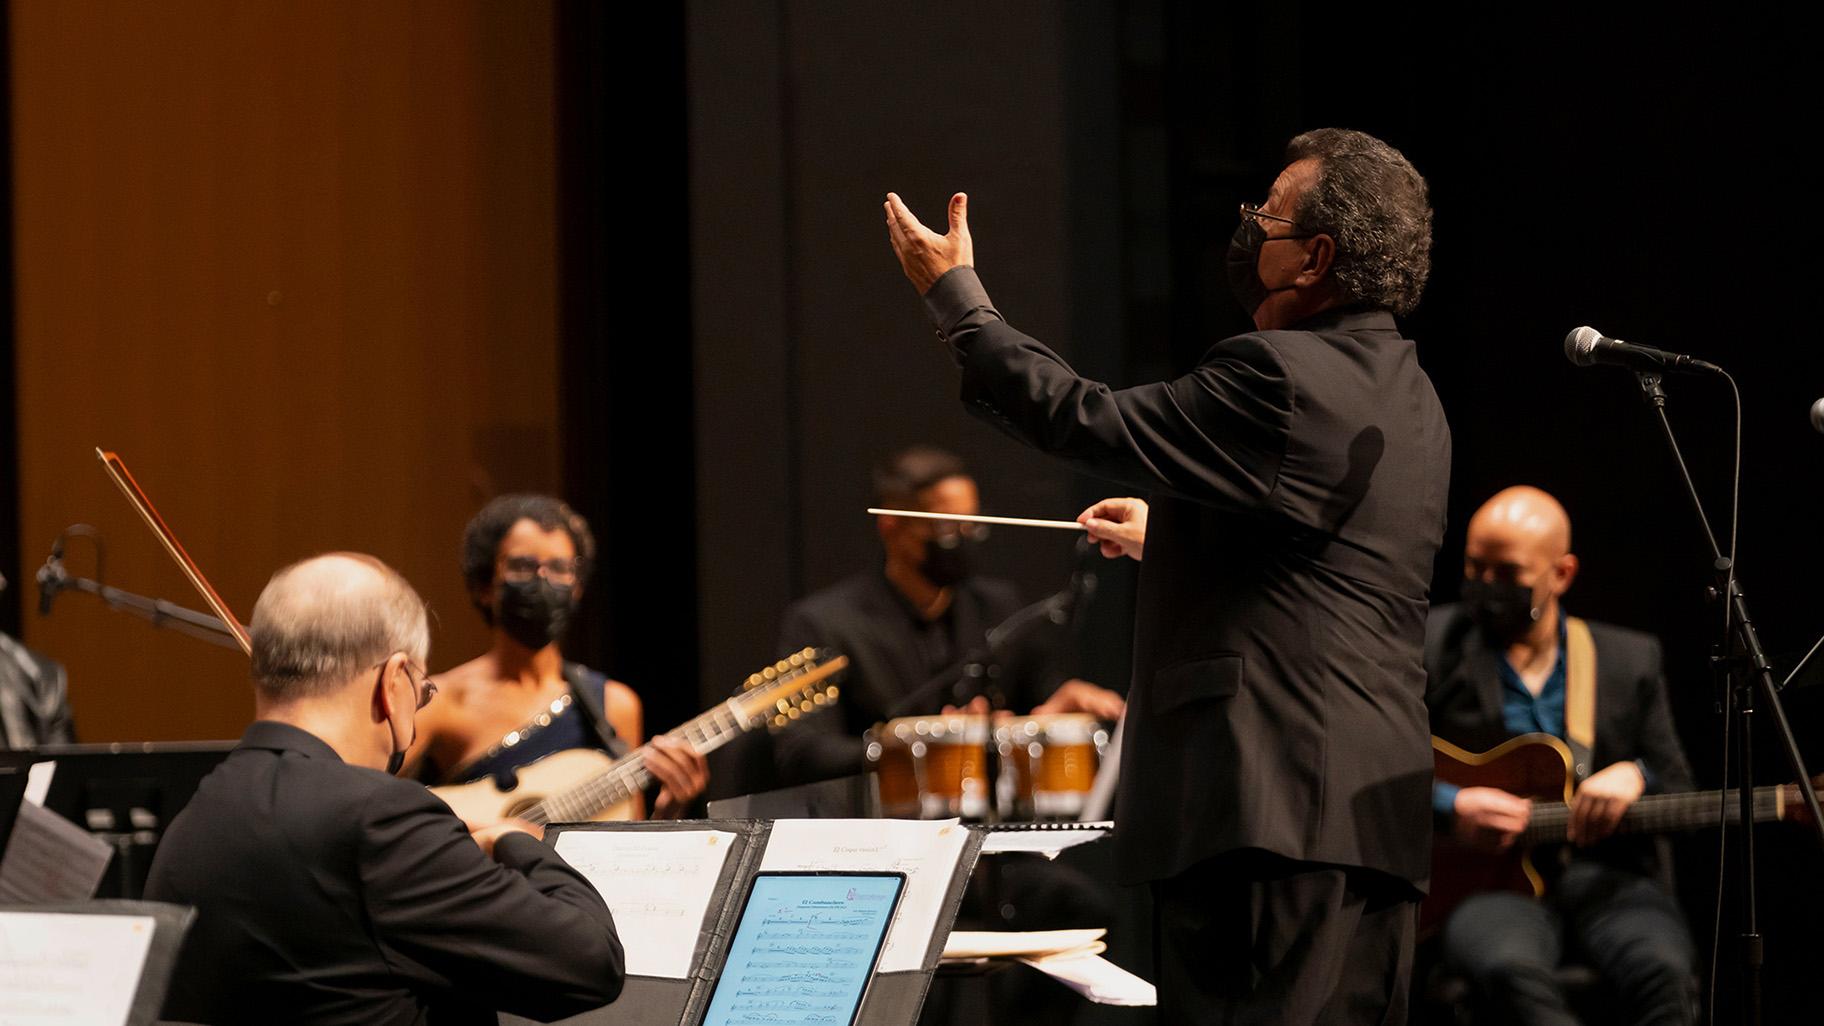 Conductor Roselín Pabón leads the performance in “From San Juan to Chicago: Un Puente Musical.” (Courtesy Chicago Philharmonic)